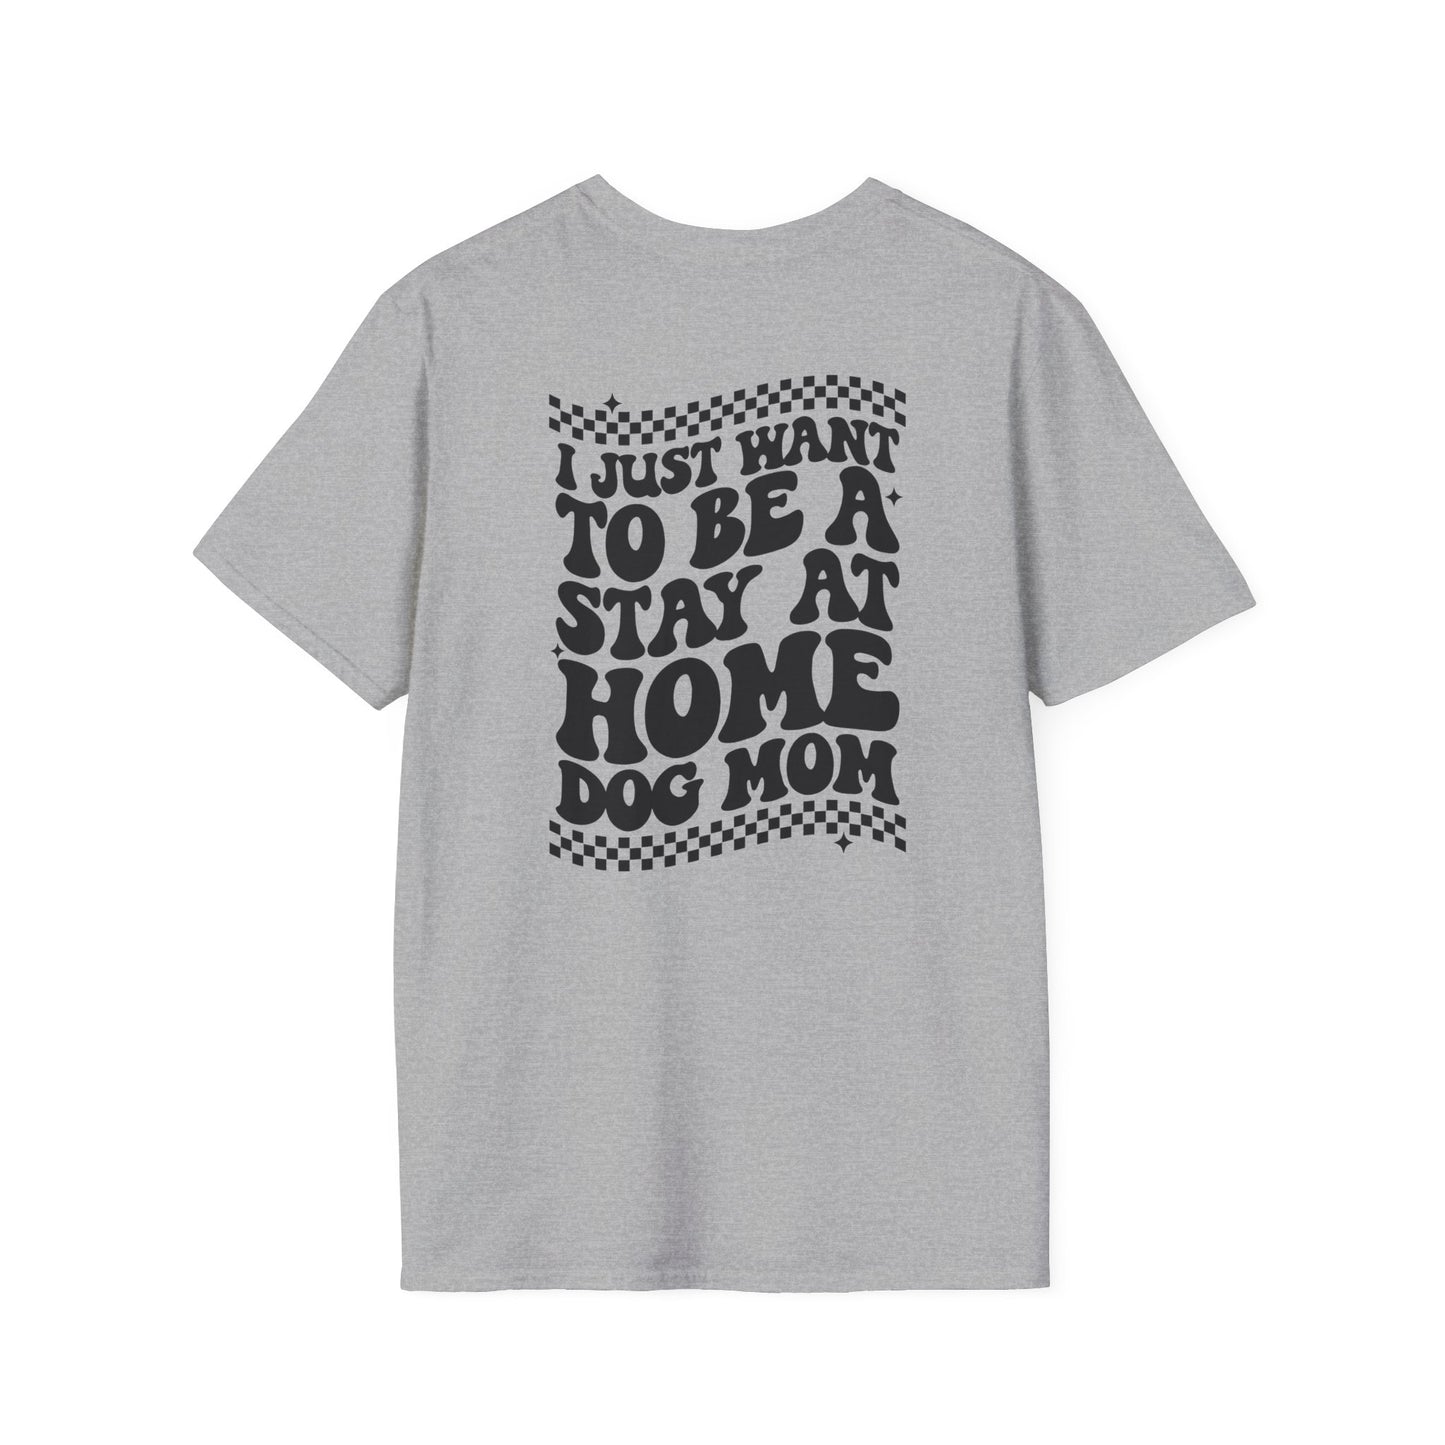 Stay at home dog mom - Unisex Softstyle T-Shirt